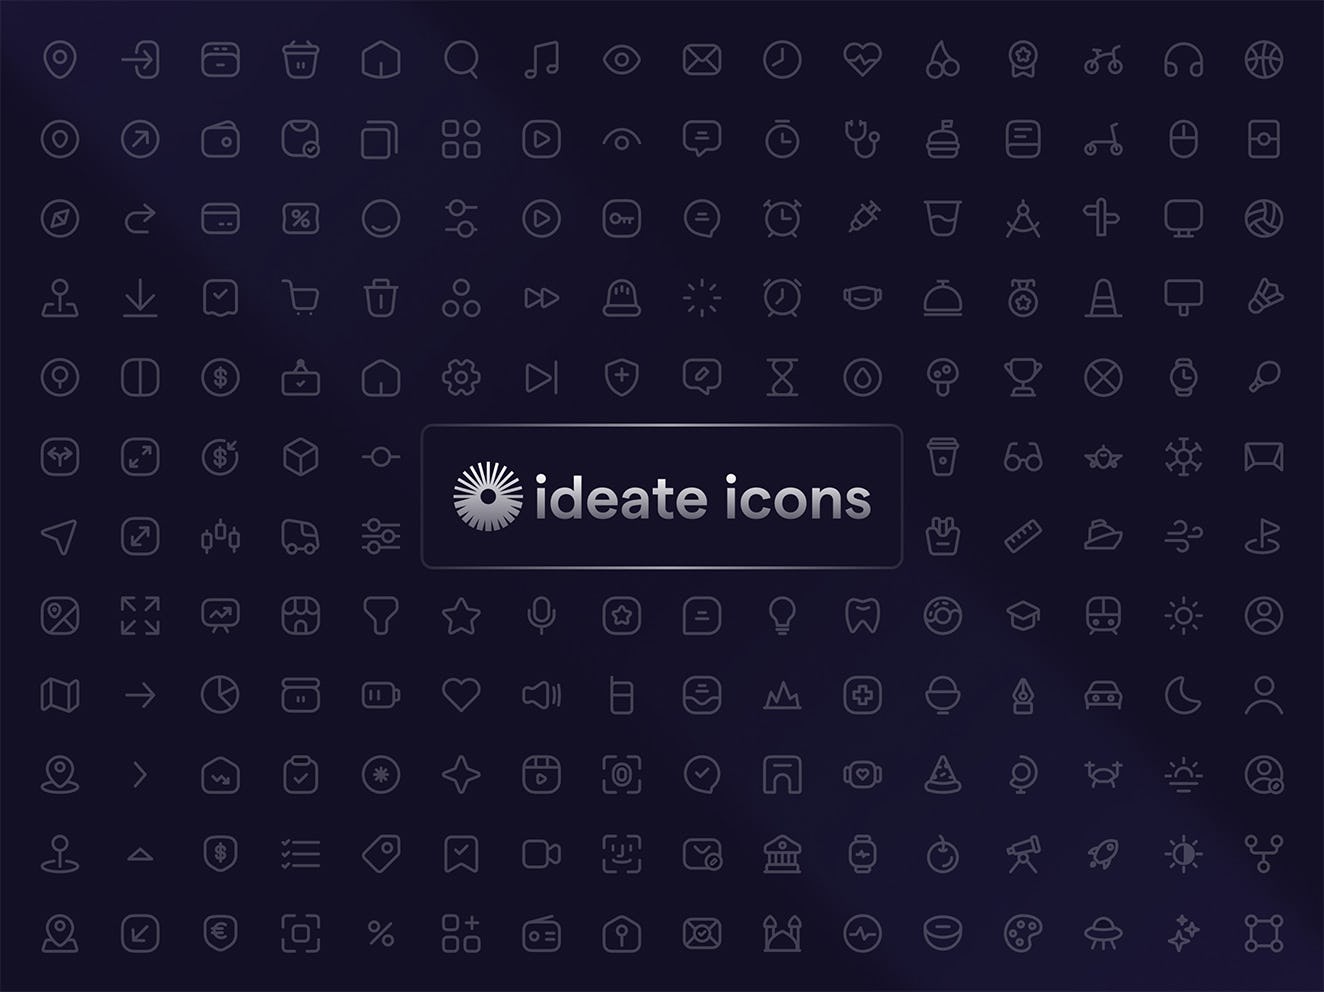 ideate icons